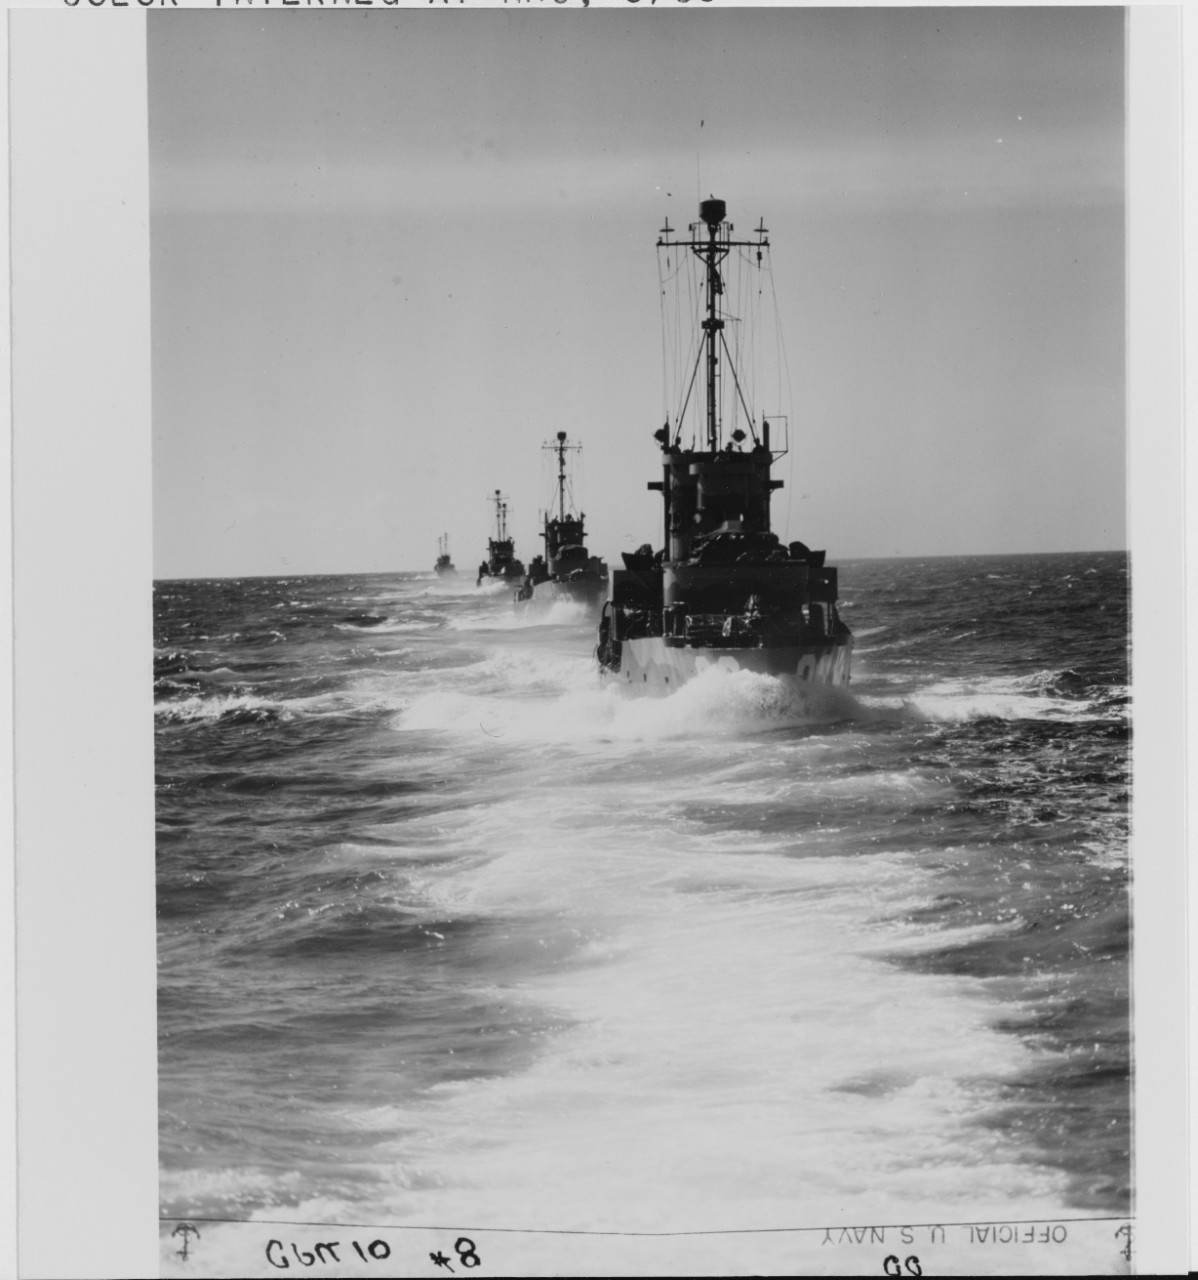 USS LCS-33 leads a column of sister ships, Pacific maneuvers, circa 1944-1945